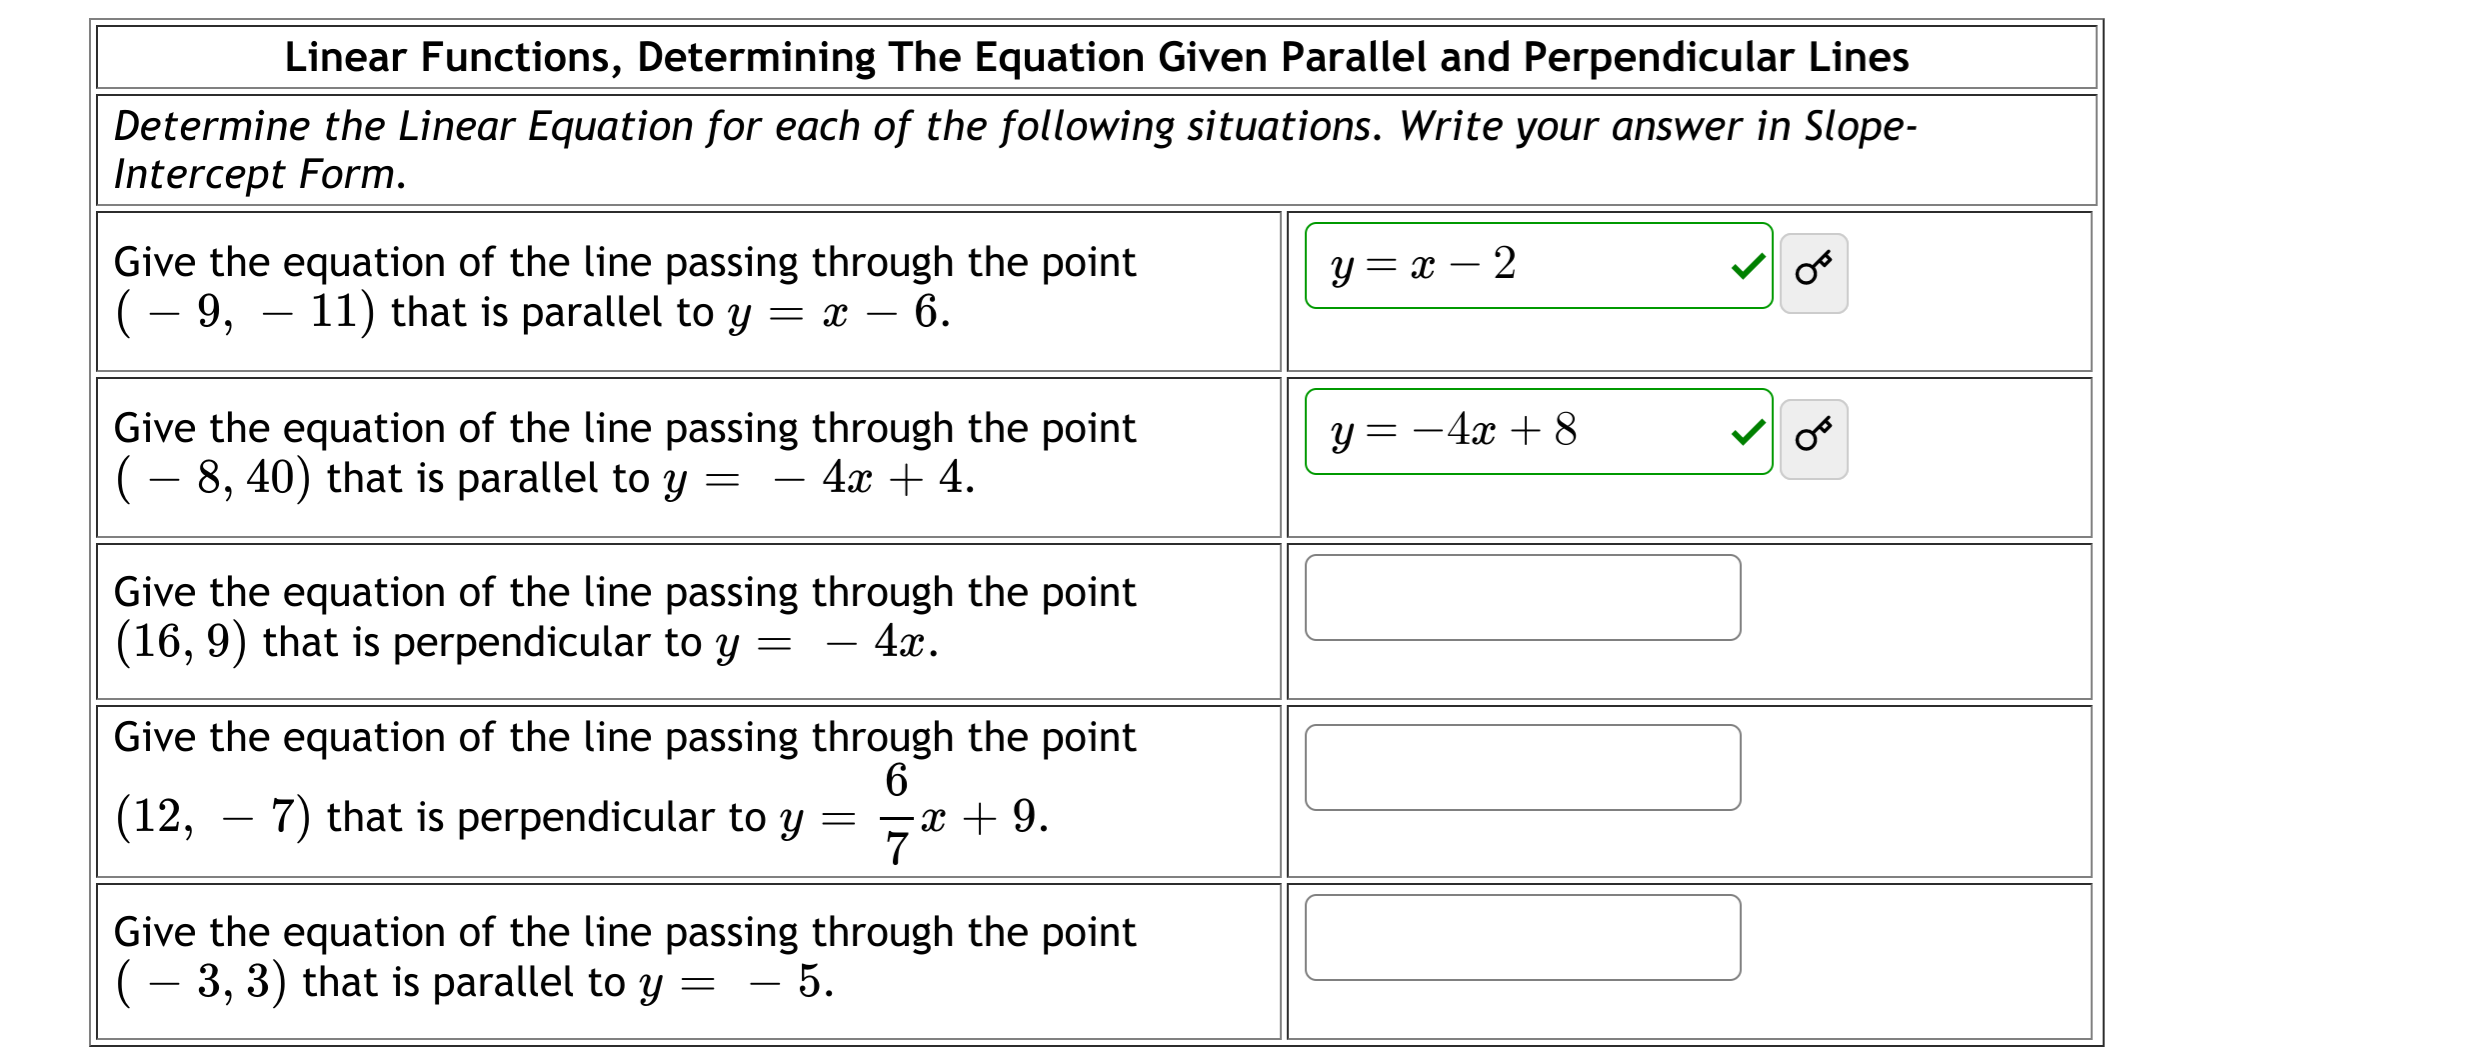 Linear Functions, Determining The Equation Given Parallel and Perpendicular Lines
Determine the Linear Equation for each of the following situations. Write your answer in Slope-
Intercept Form.
Give the equation of the line passing through the point
(- 9, – 11) that is parallel to y = x – 6.
y = x – 2
Give the equation of the line passing through the point
(- 8, 40) that is parallel to y = – 4x + 4.
Y = -4x + 8
Give the equation of the line passing through the point
(16, 9) that is perpendicular to y
4х.
-
Give the equation of the line passing through the point
6.
-x + 9.
7
(12, – 7) that is perpendicular to y
-
Give the equation of the line passing through the point
(– 3, 3) that is parallel to y =
– 5.
-
-
